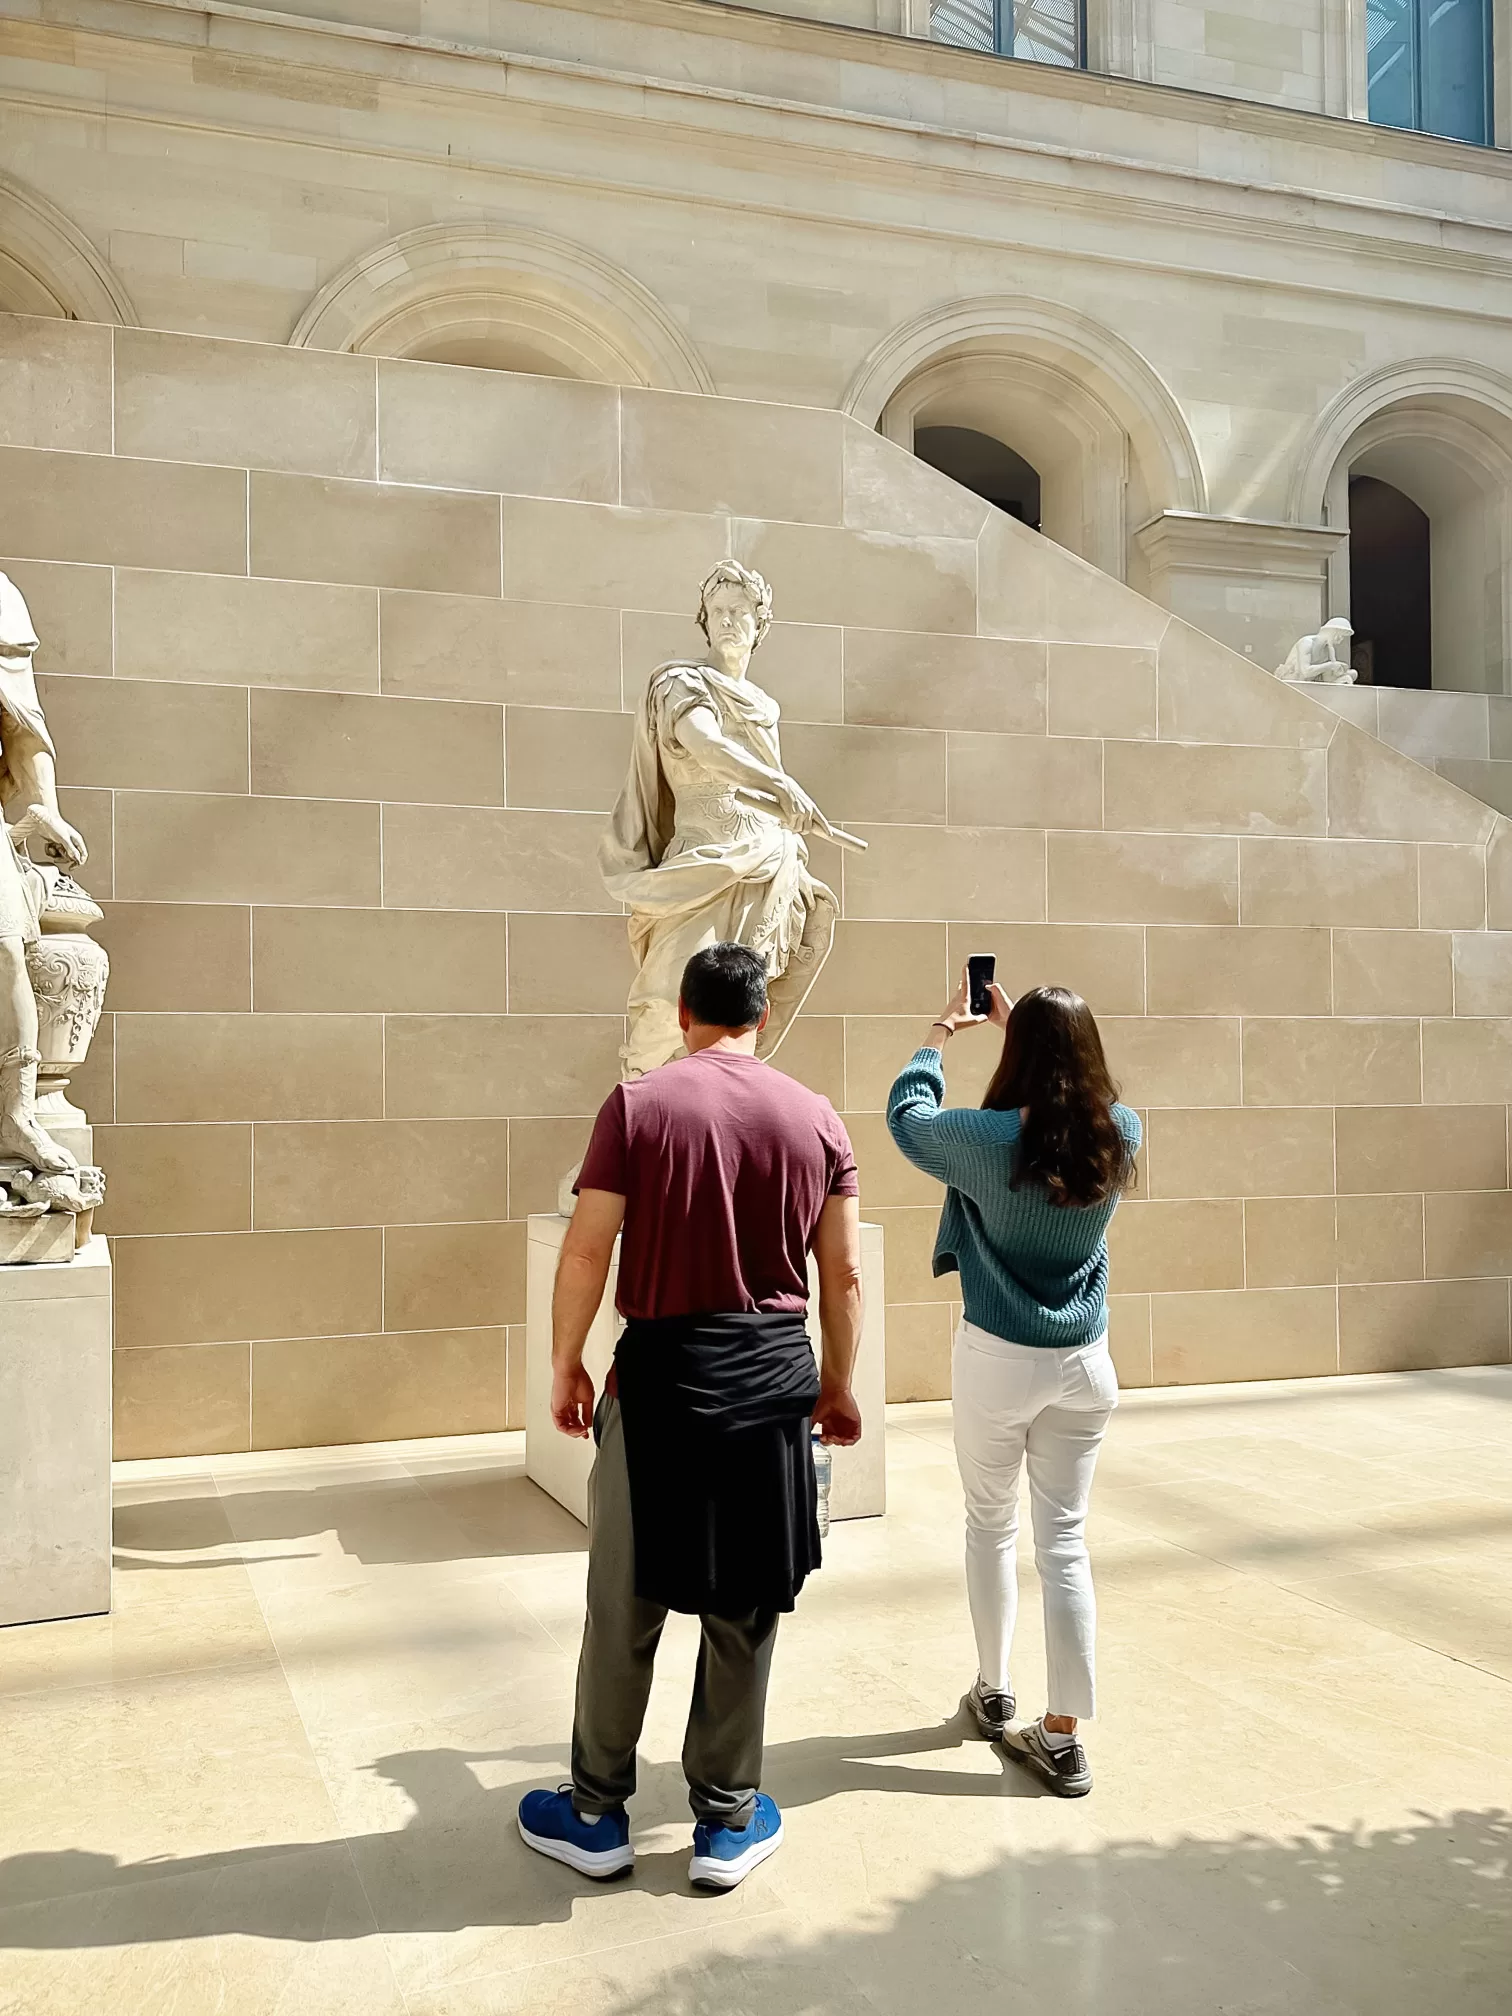 Is the Louvre worth it?